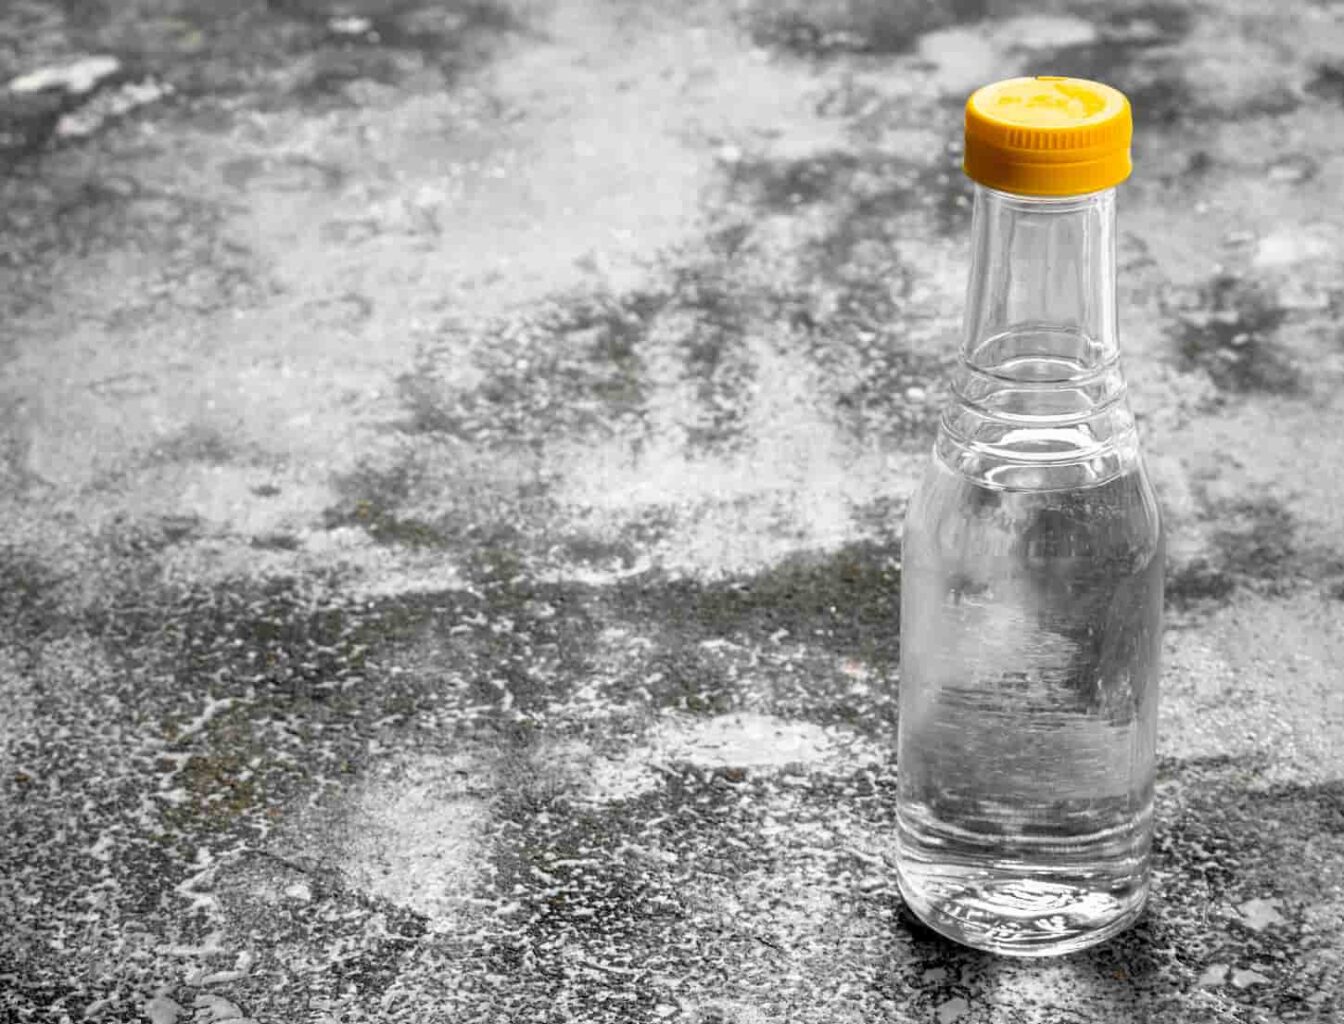 An image of a bottle of vinegar on a rustic background.